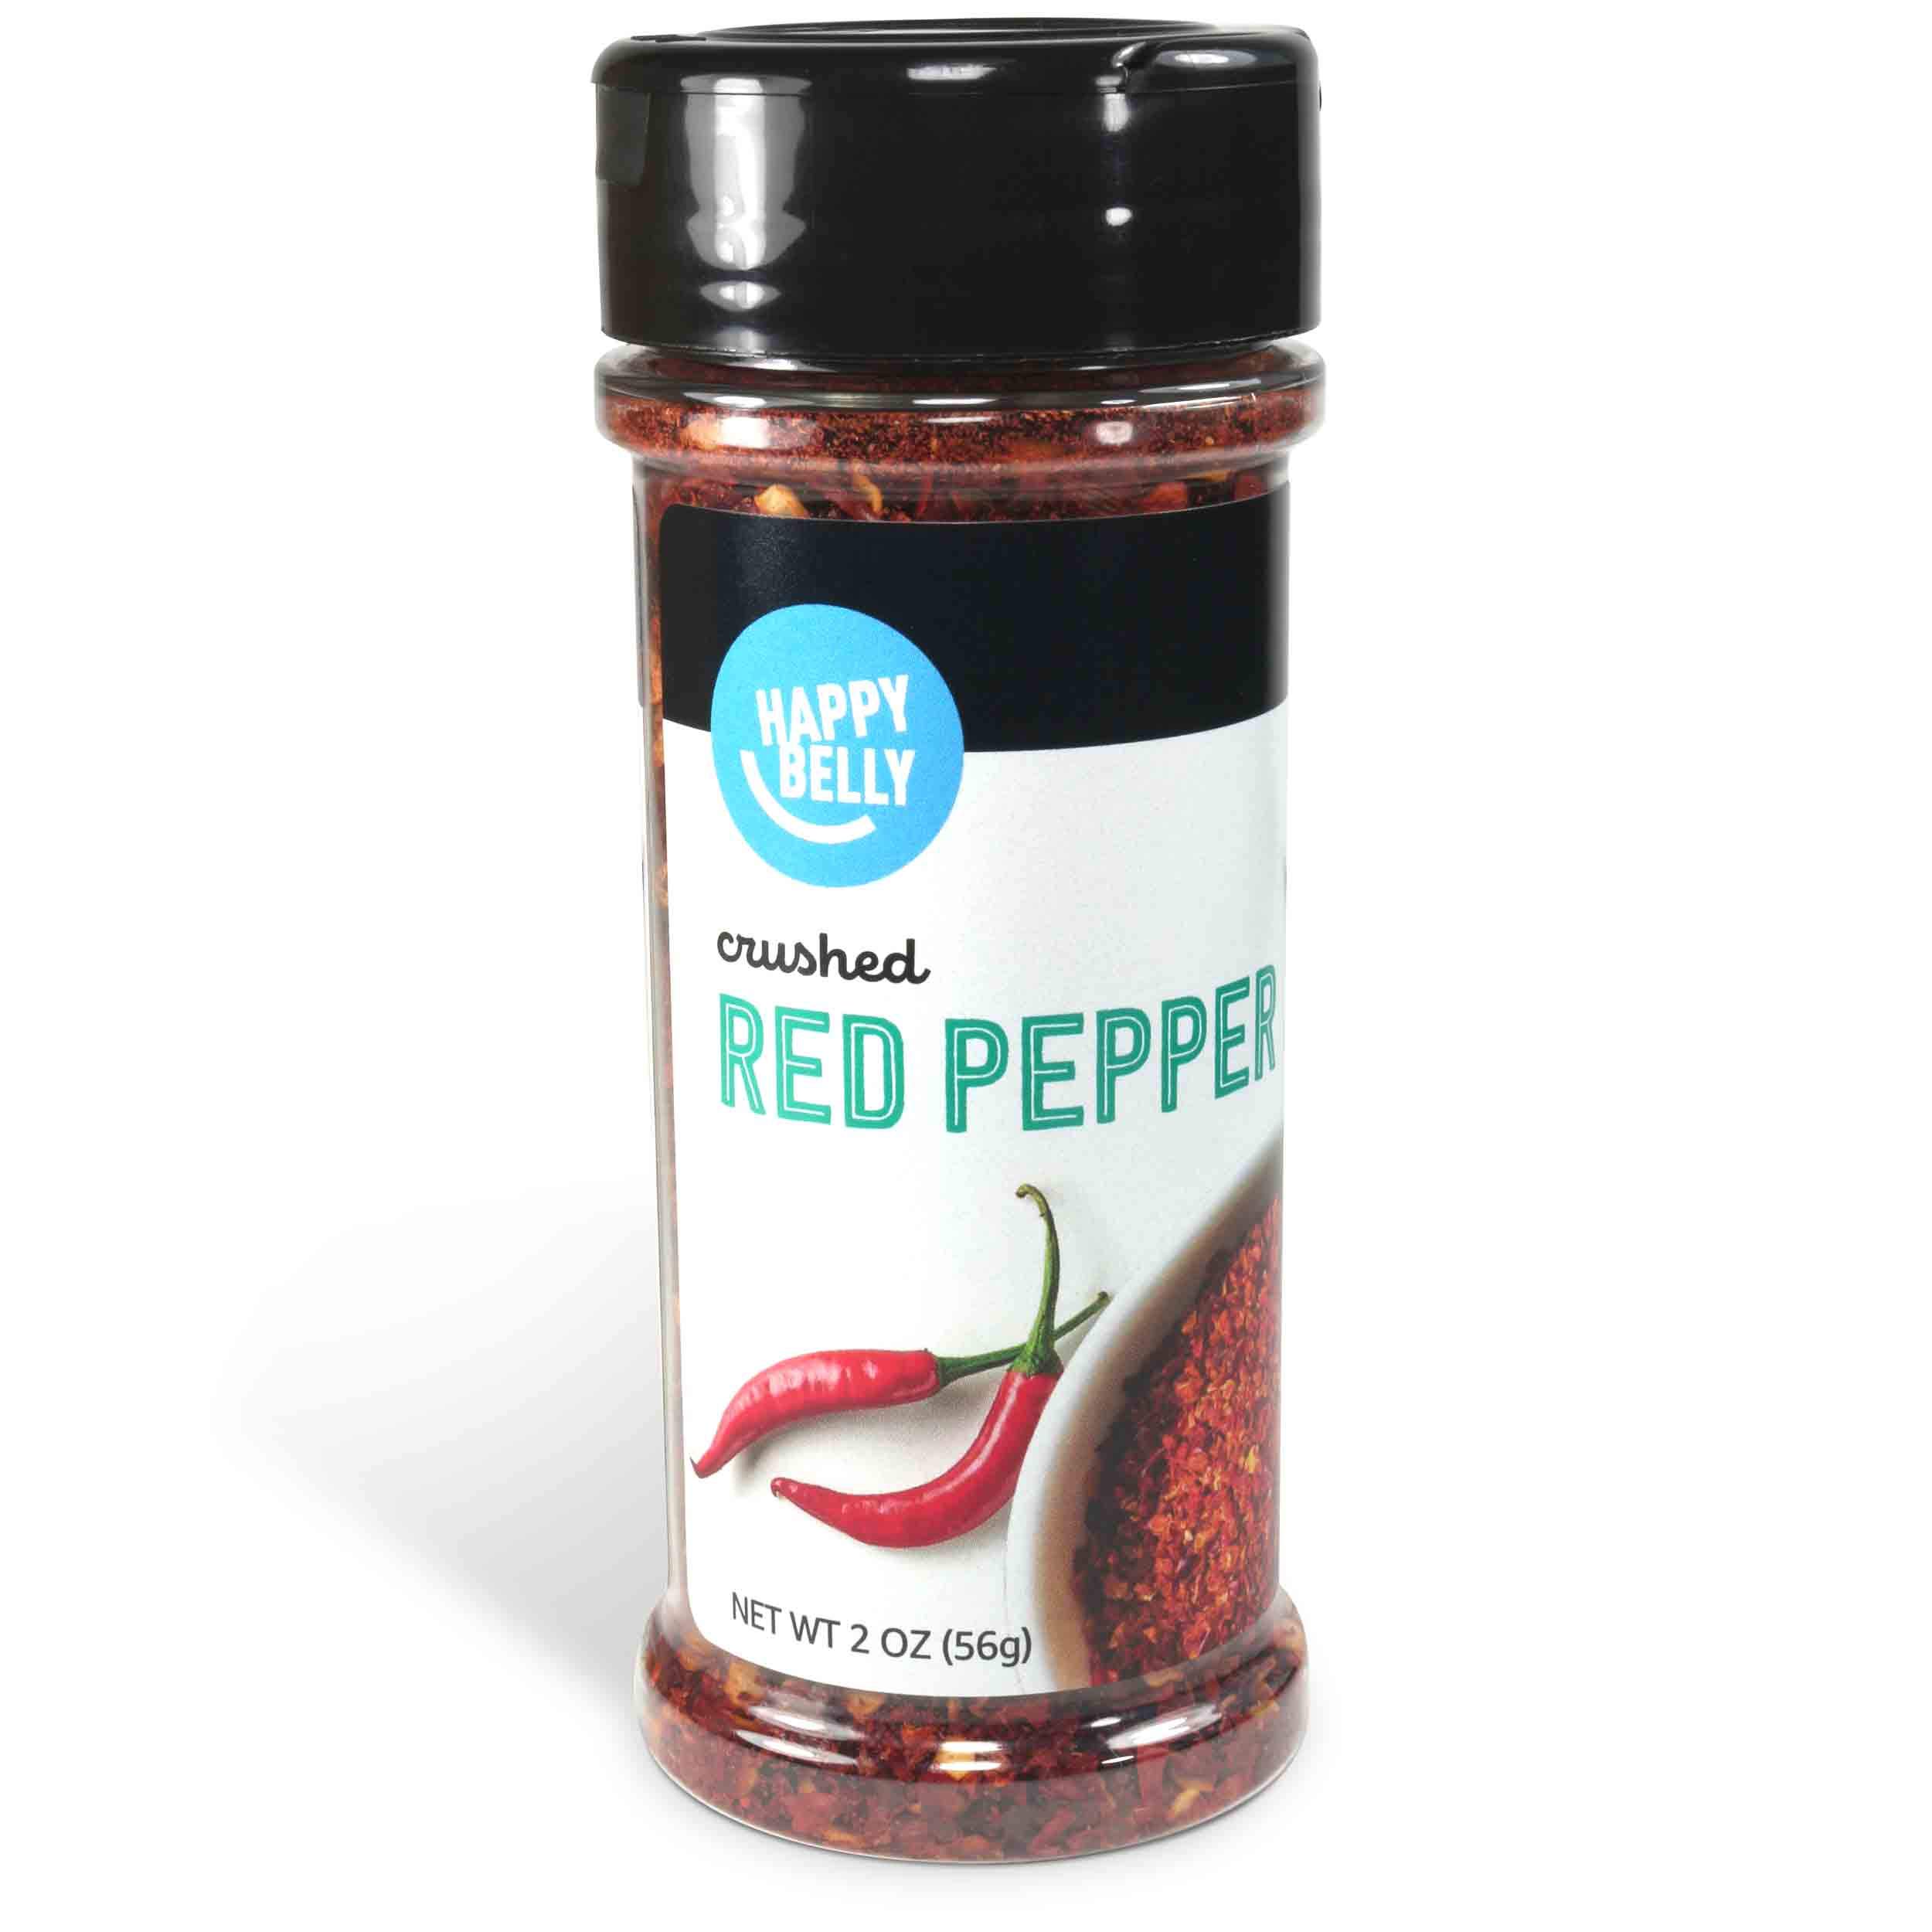 2-Oz Happy Belly Crushed Red Pepper $1.81 + Free Shipping w/ Prime or on orders over $35